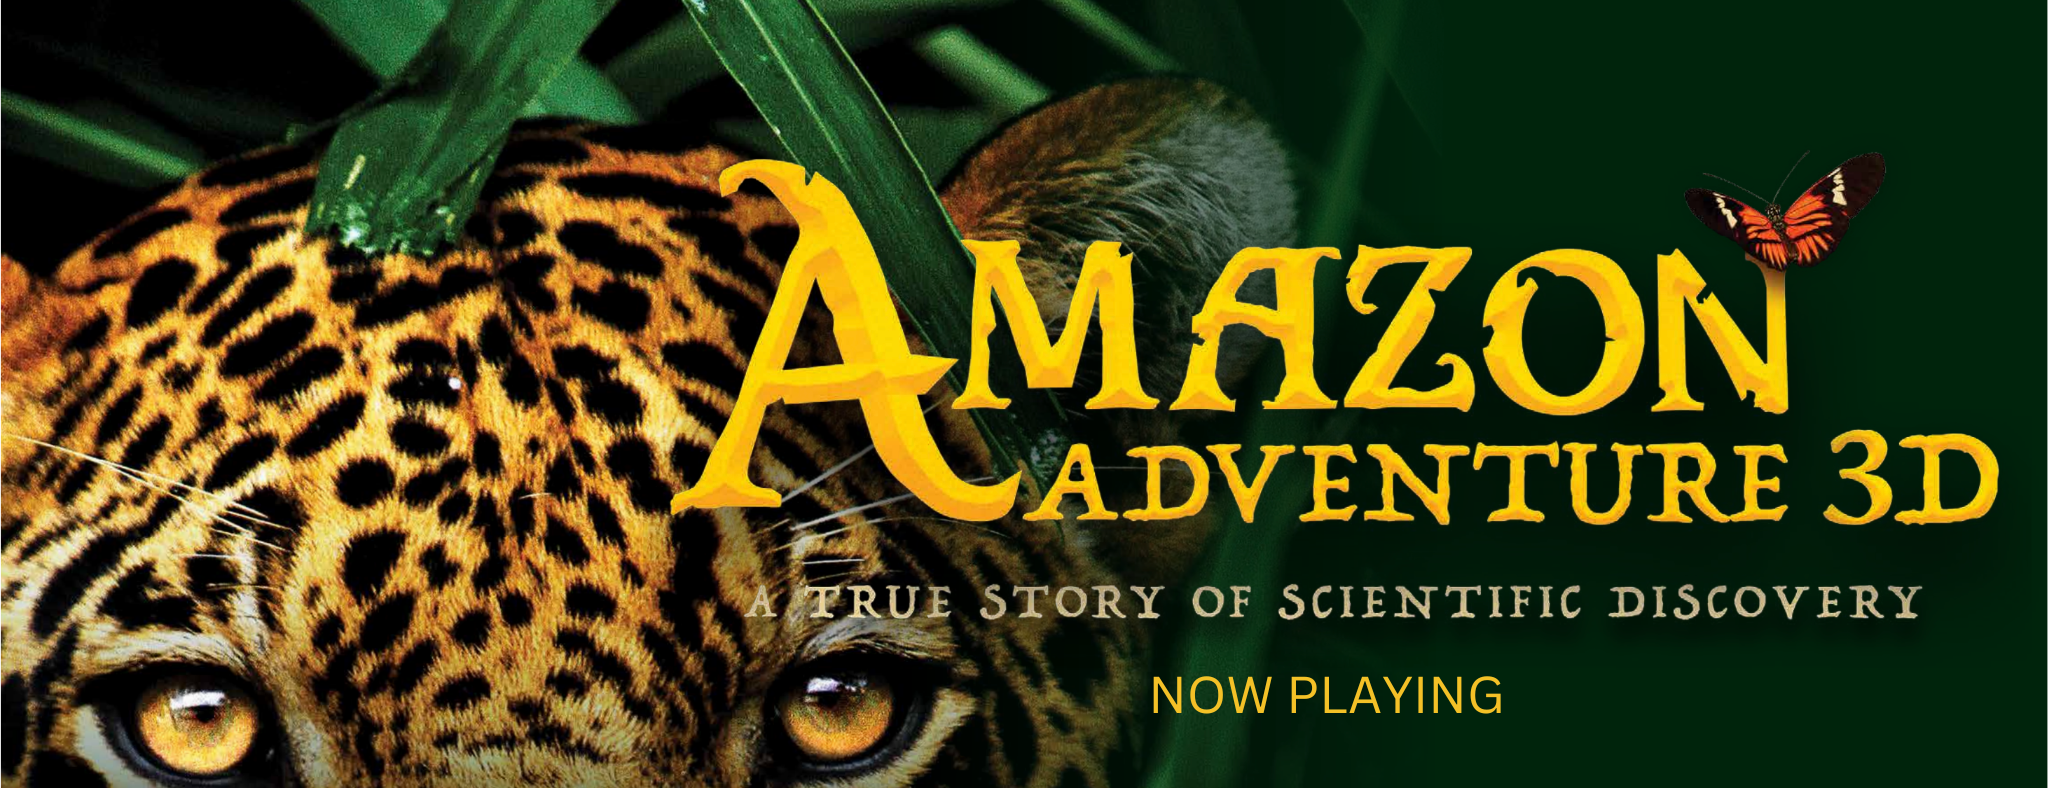 Amazon Adventure 3D logo with now playing messaging displayed on photo of jaguar peering through rainforest brush. 